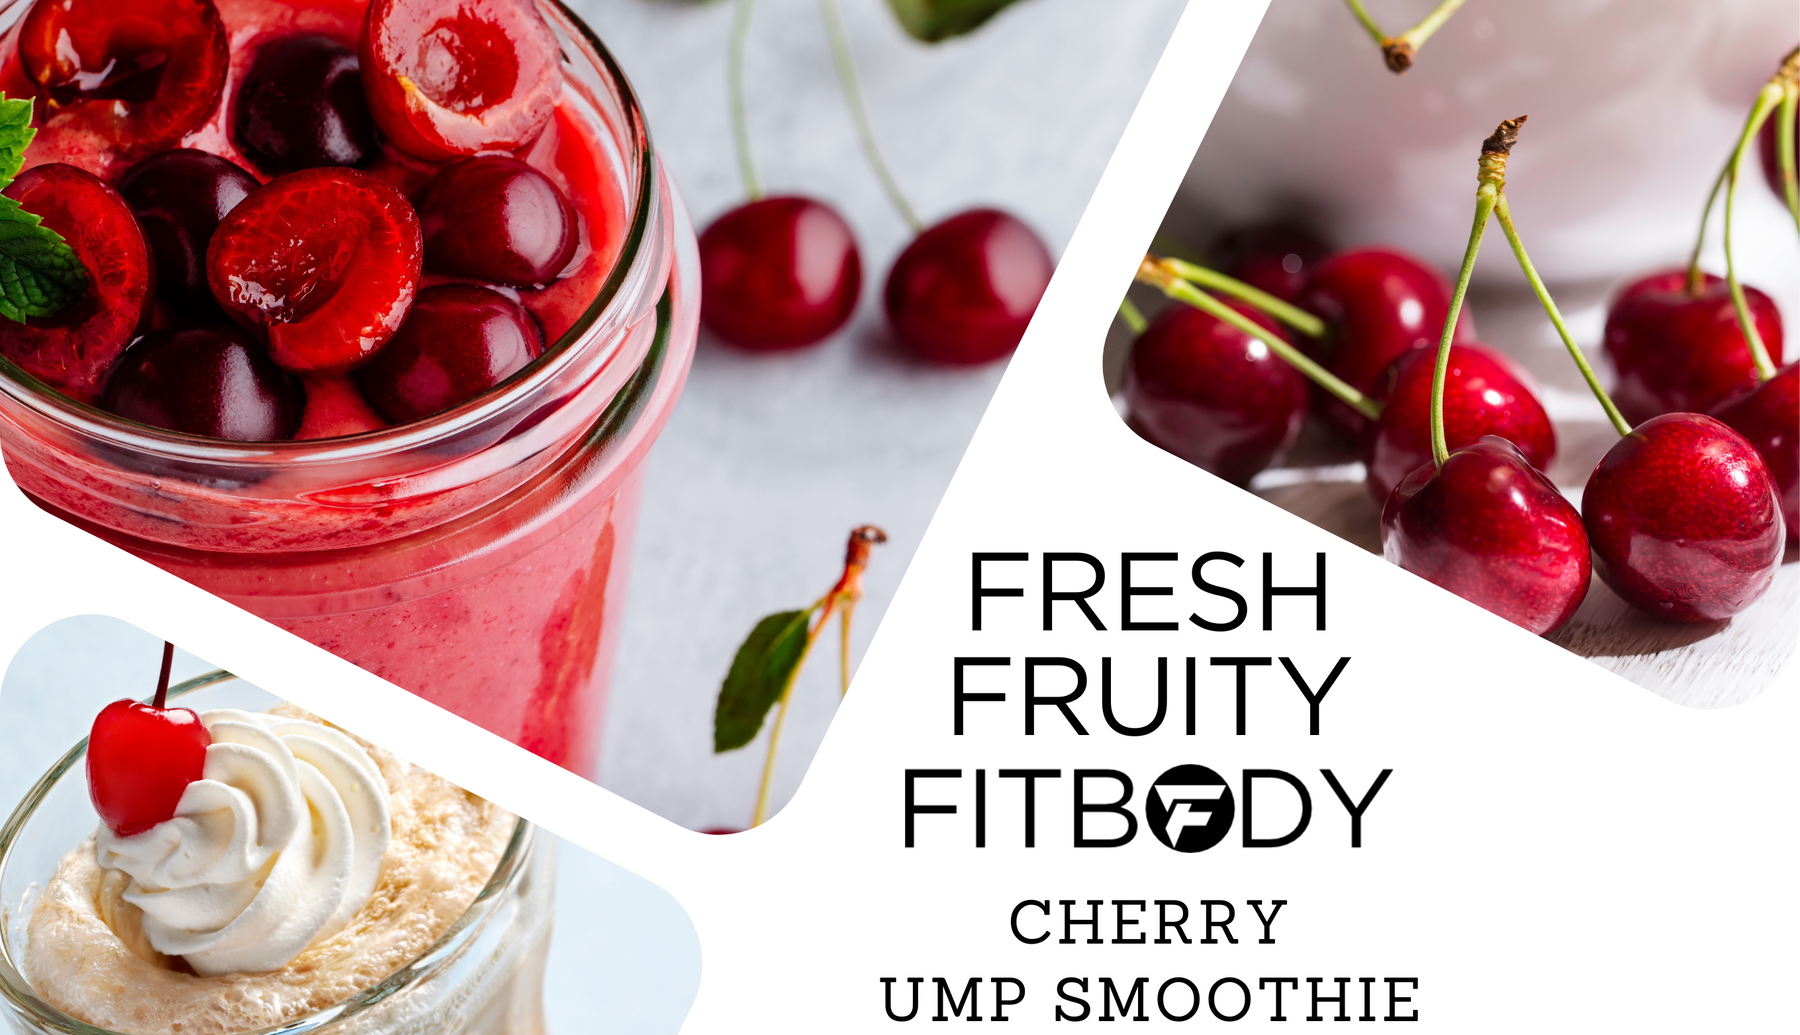 Get Creative with this UMP Cherry Protein Smoothie